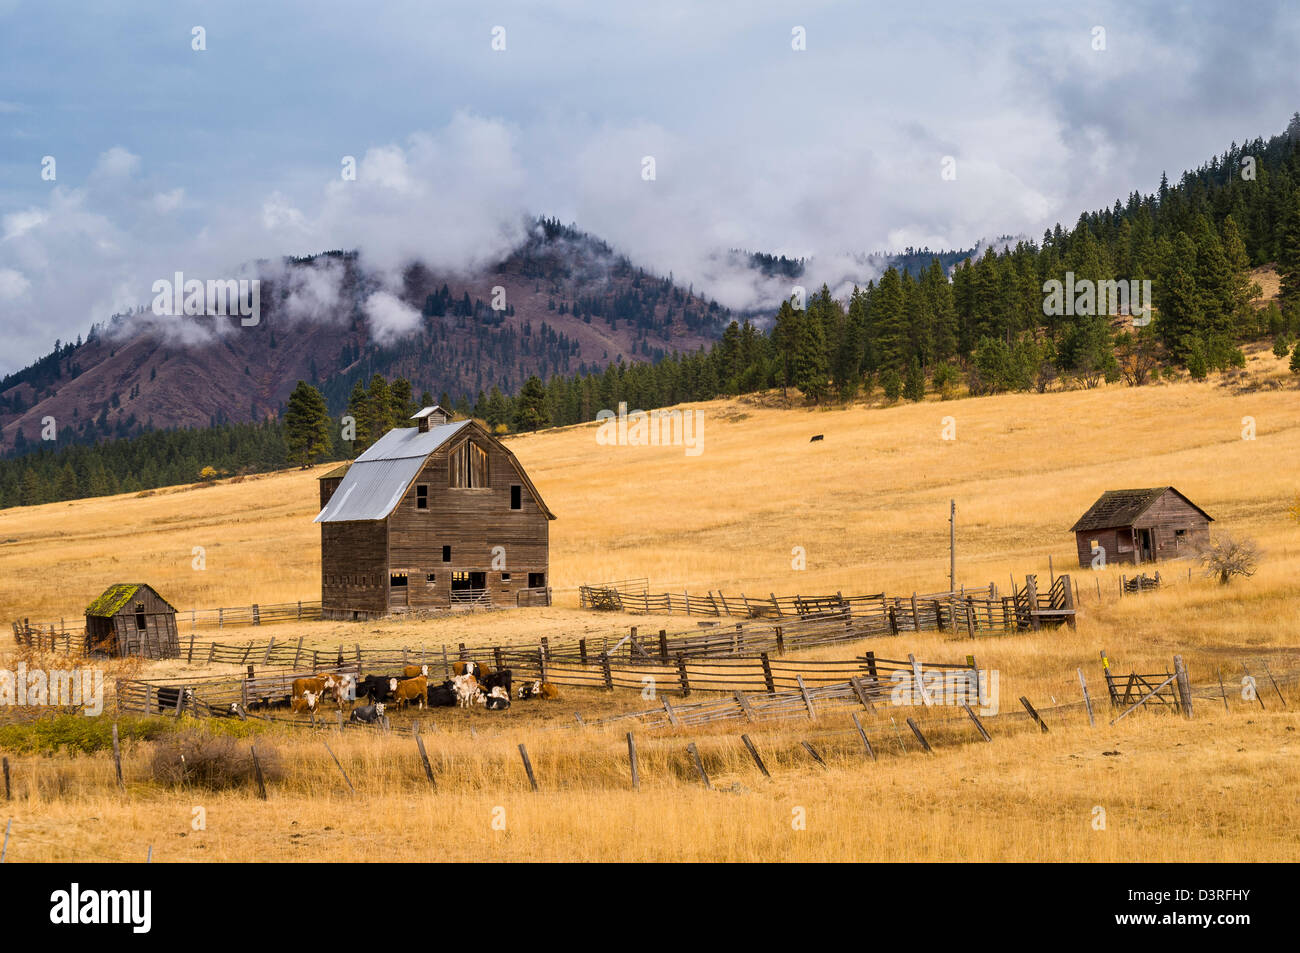 Barn, cattle and ranch along Highway 97 north of Ellensburg in central Washington. Stock Photo